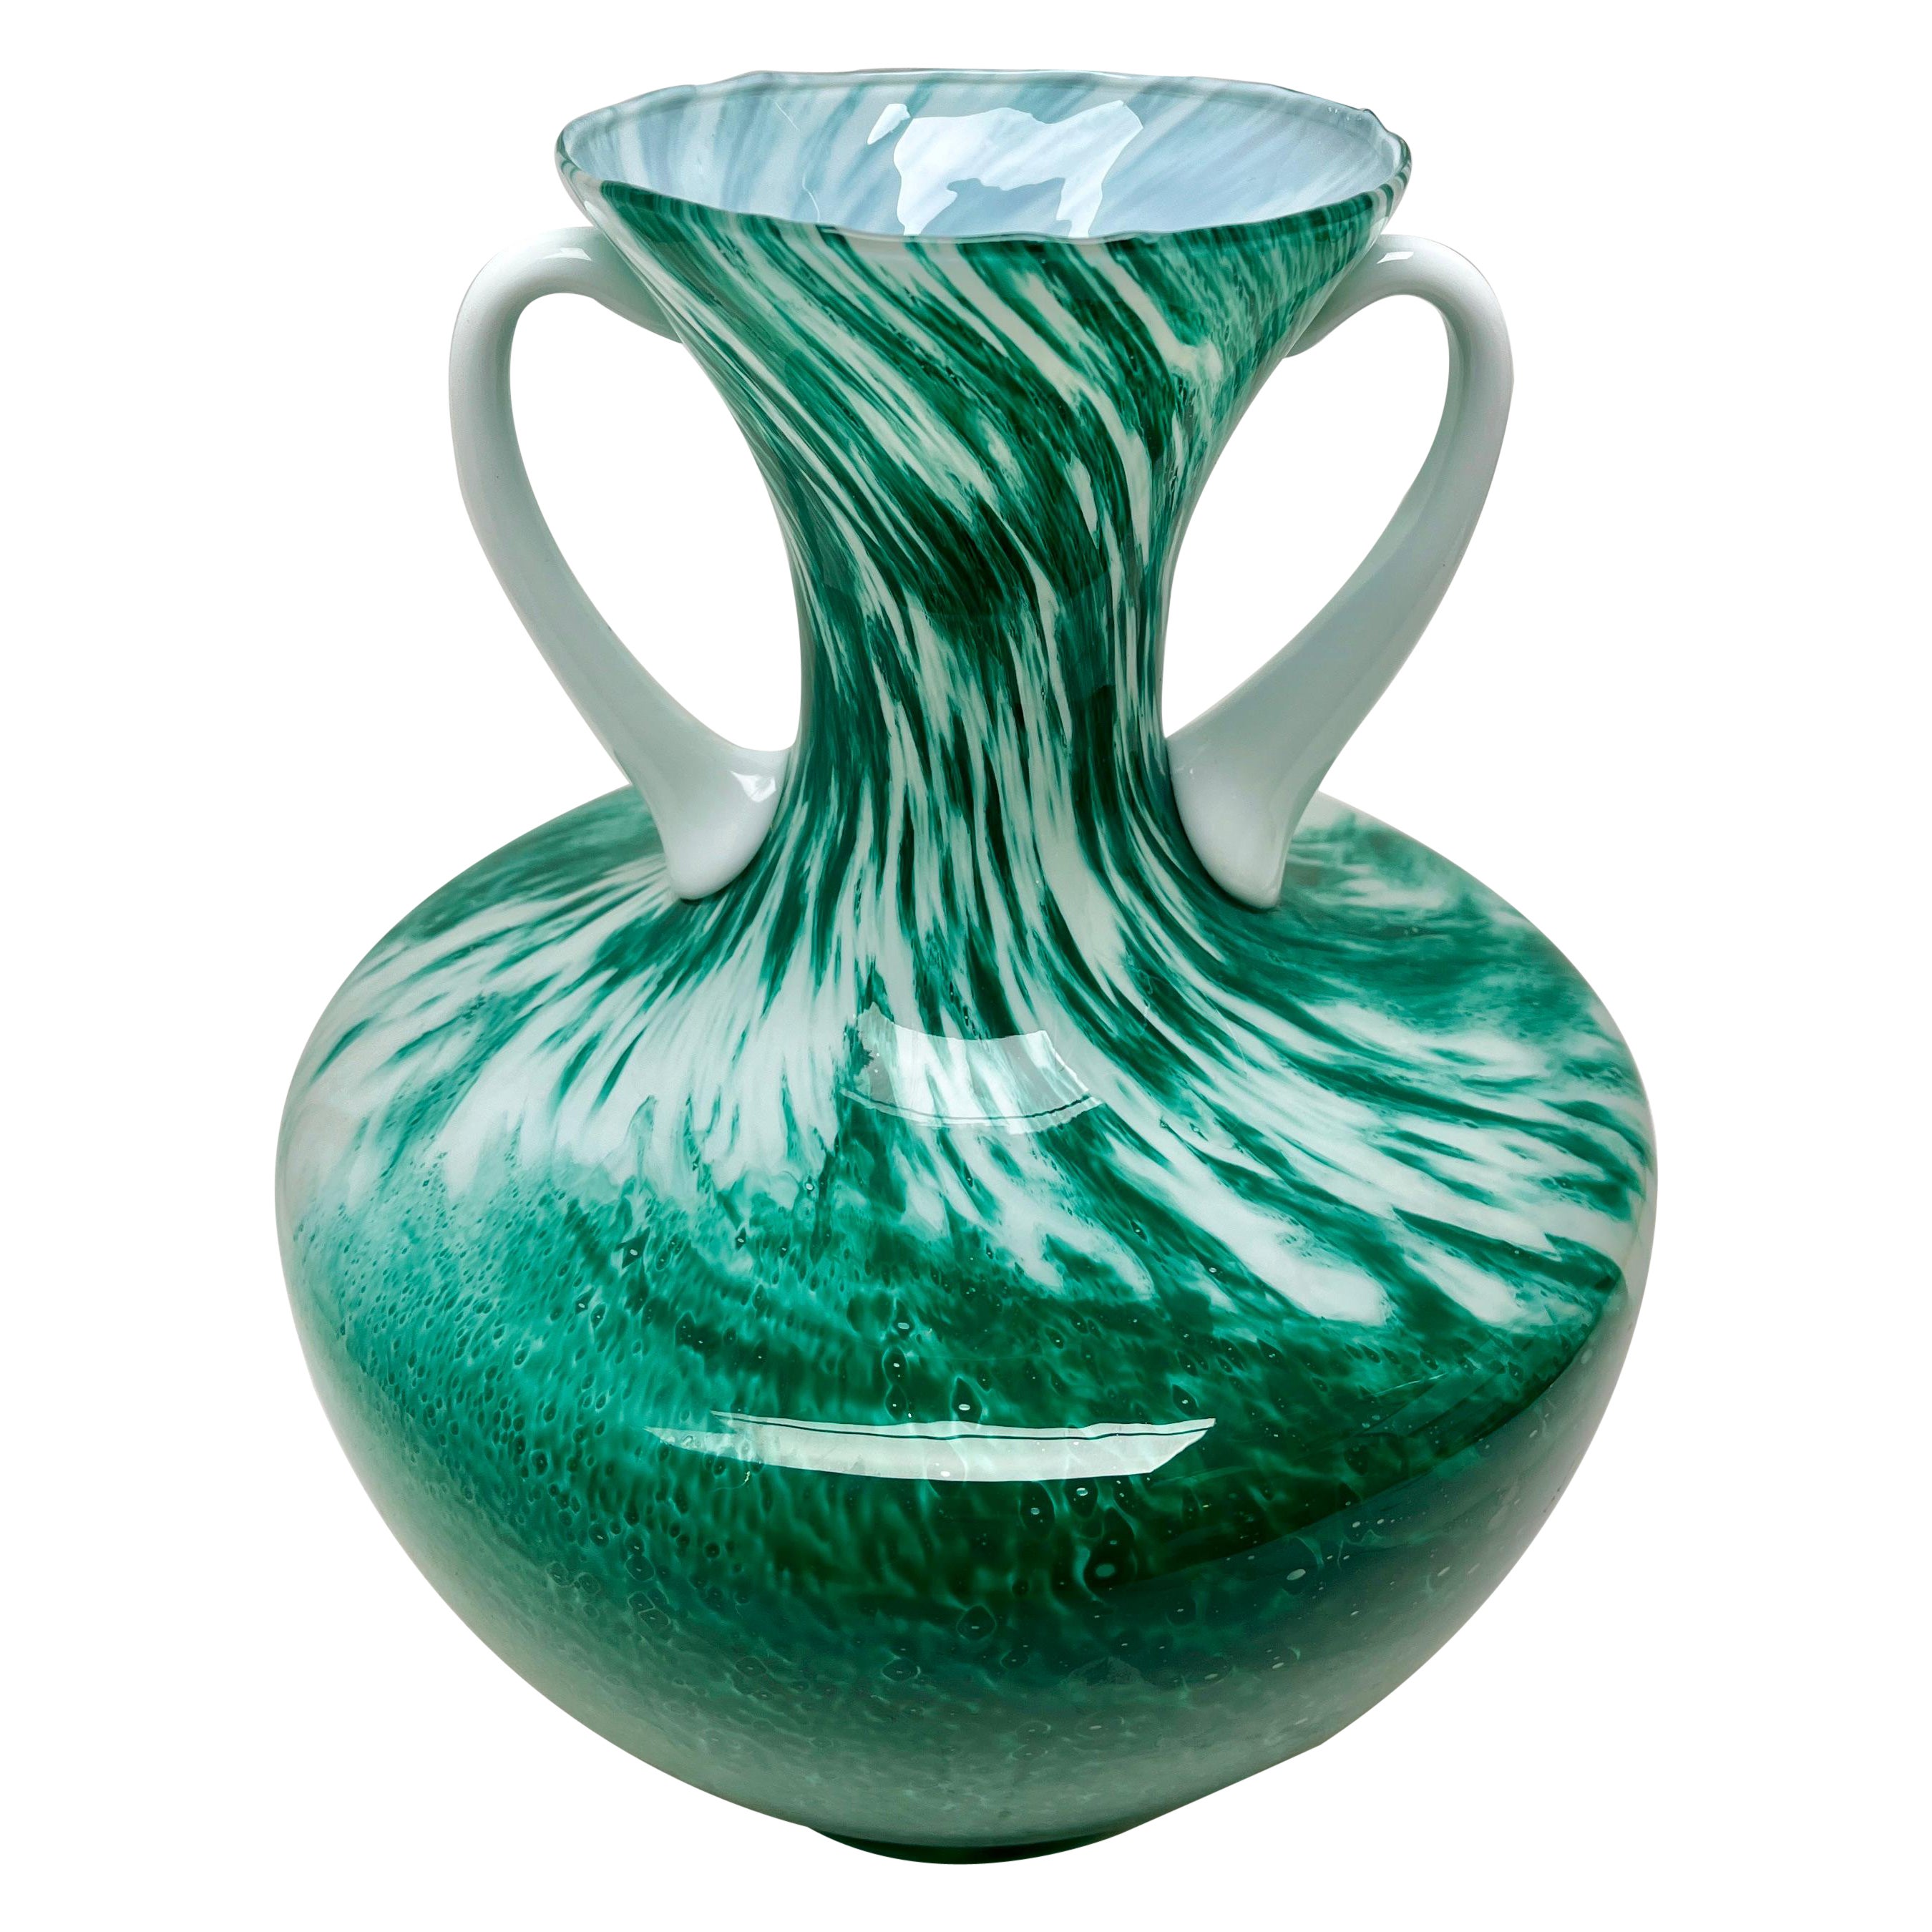 Opalescent Green and White Italian Opaline Pitcher from Florence